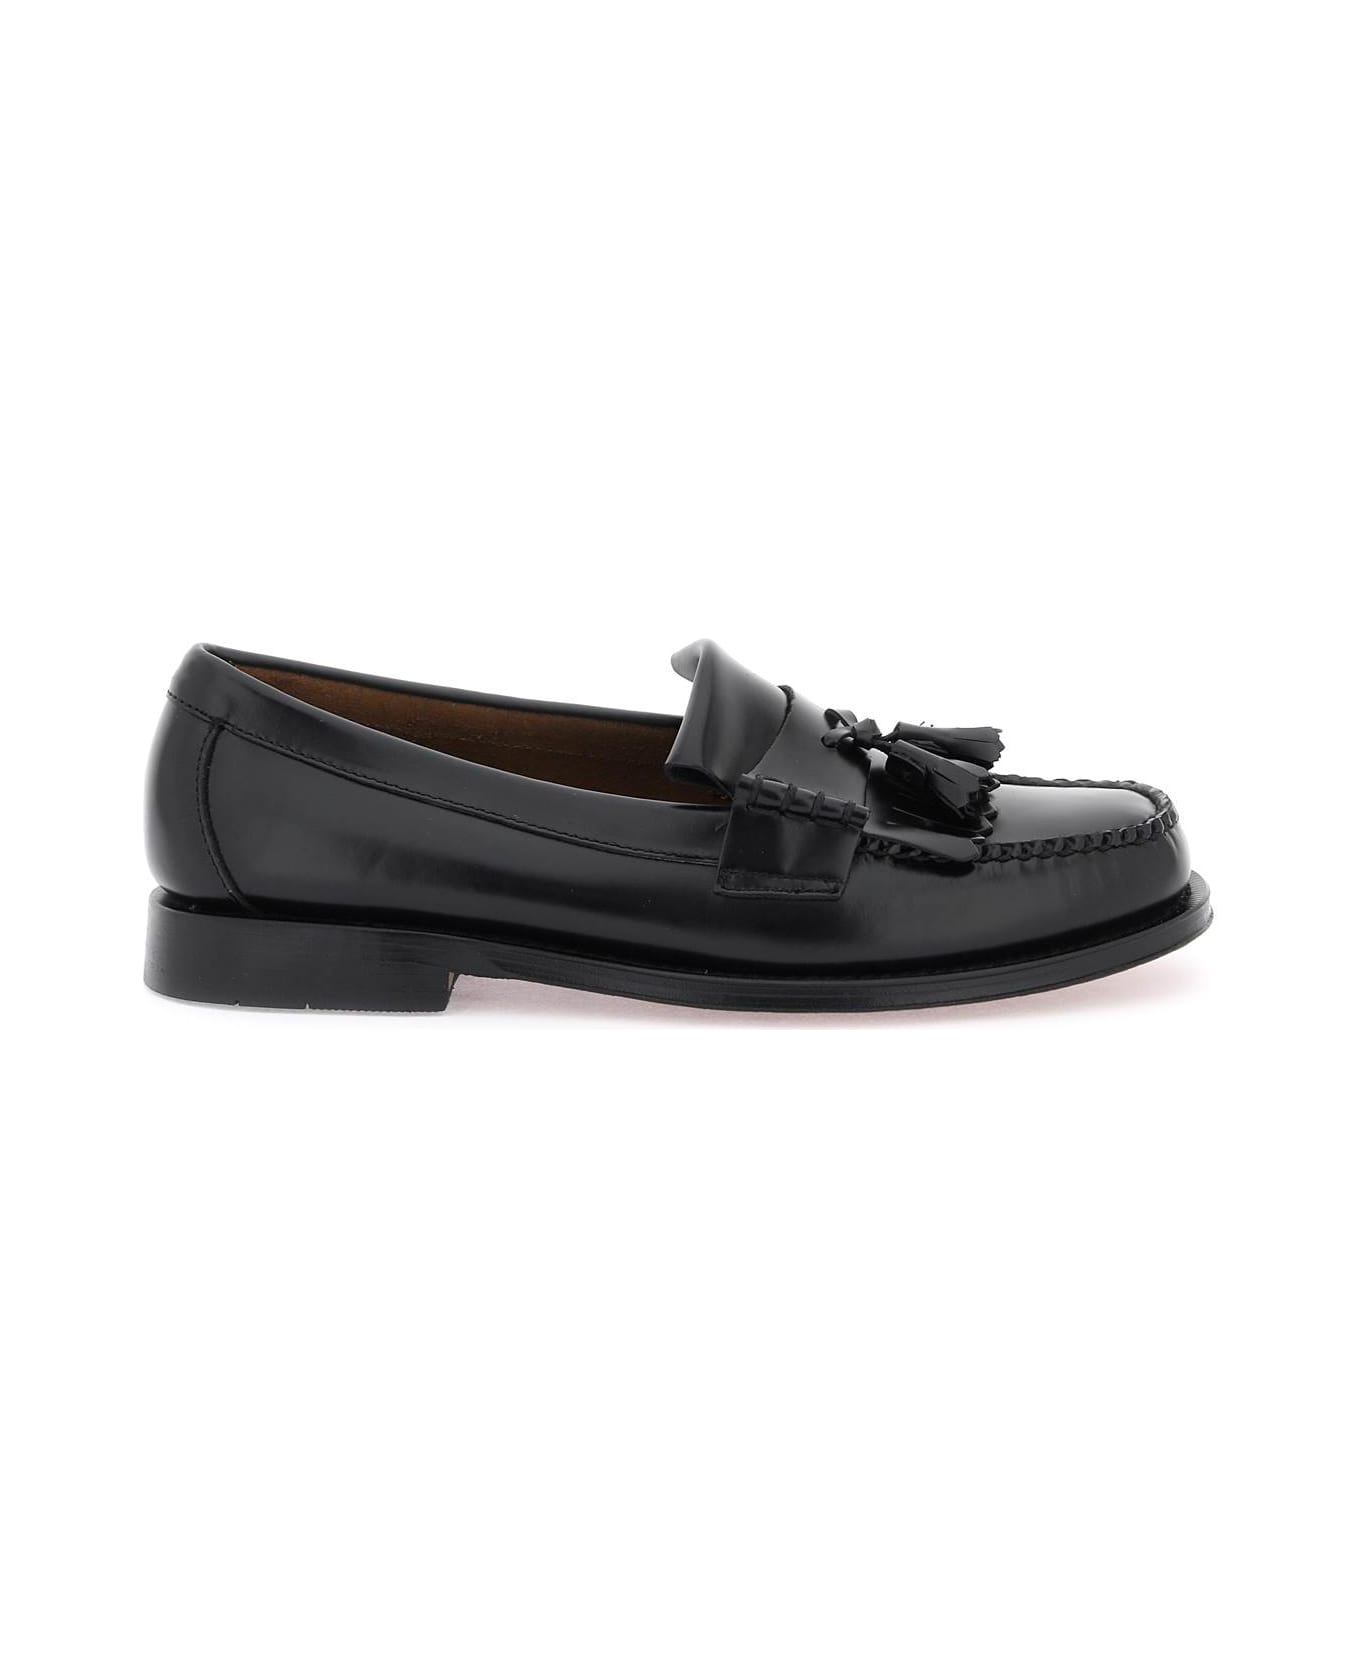 G.H.Bass & Co. Esther Kiltie Weejuns Loafers - BLACK (Black)